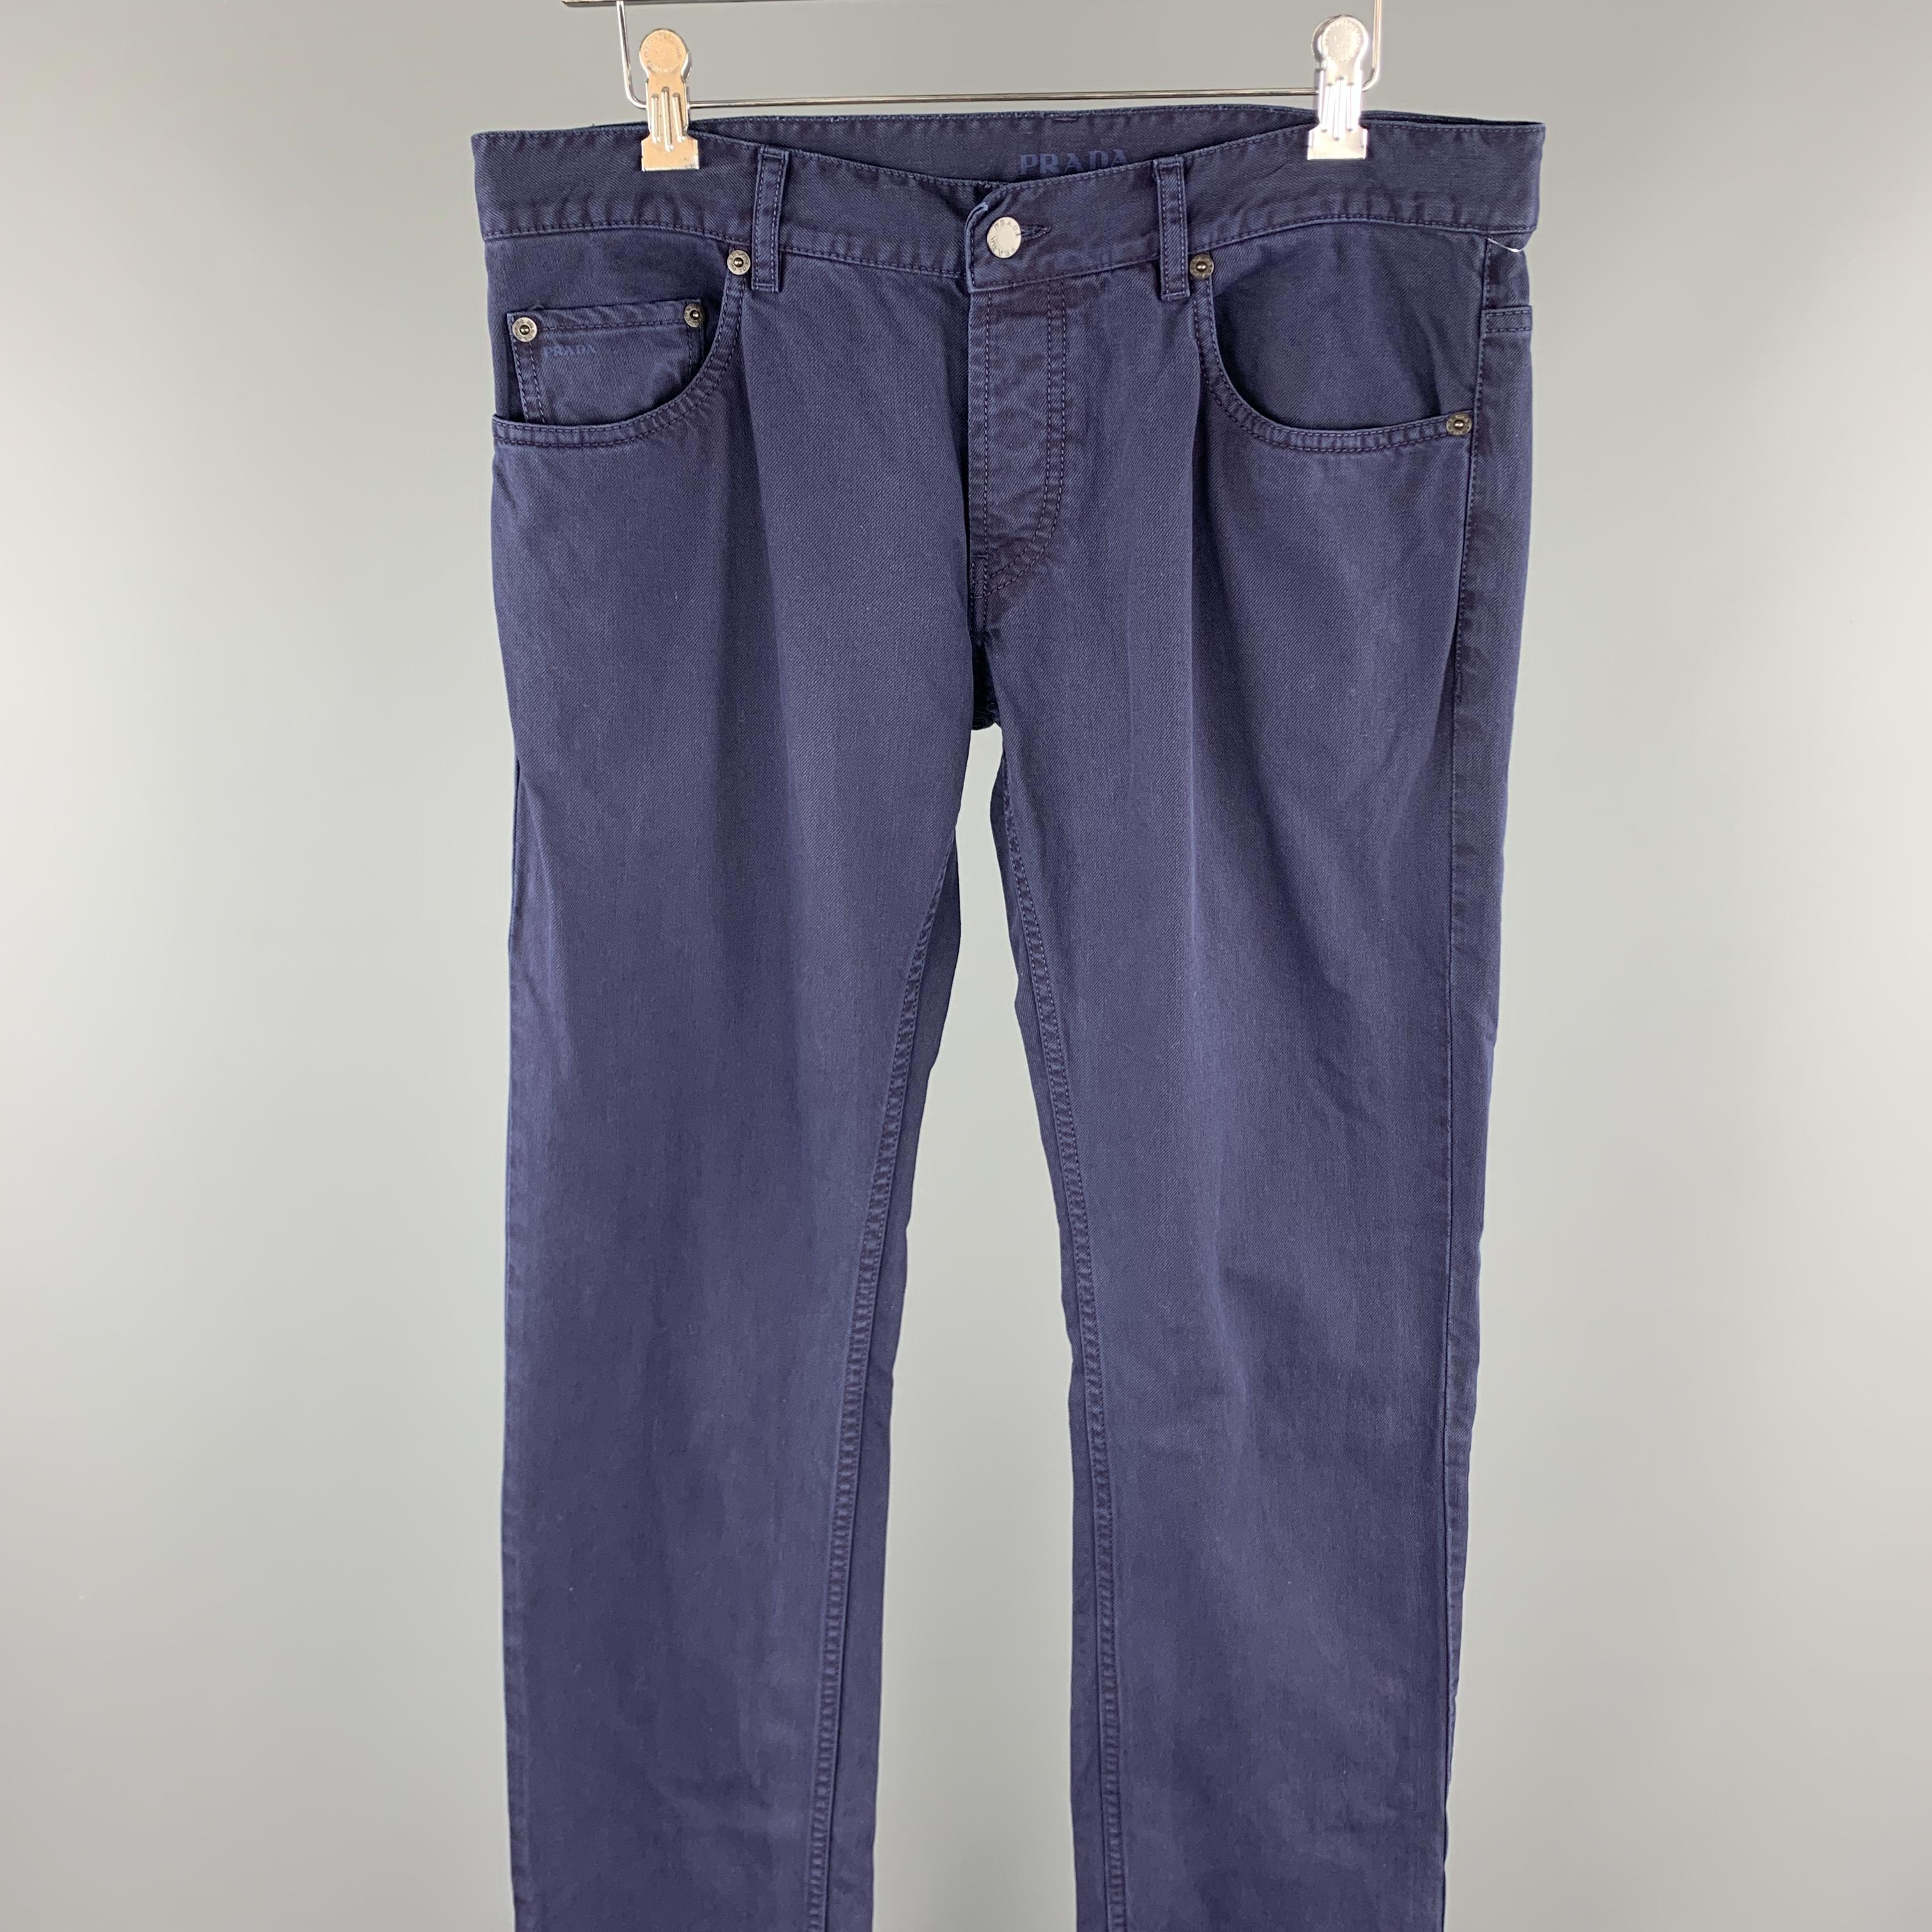 PRADA casual pants comes in a navy cotton featuring a jean cut style and a zip fly closure. 

Very Good Pre-Owned Condition.
Marked: 33

Measurements:

Waist: 34 in.
Rise: 8 in. 
Inseam: 34 in.